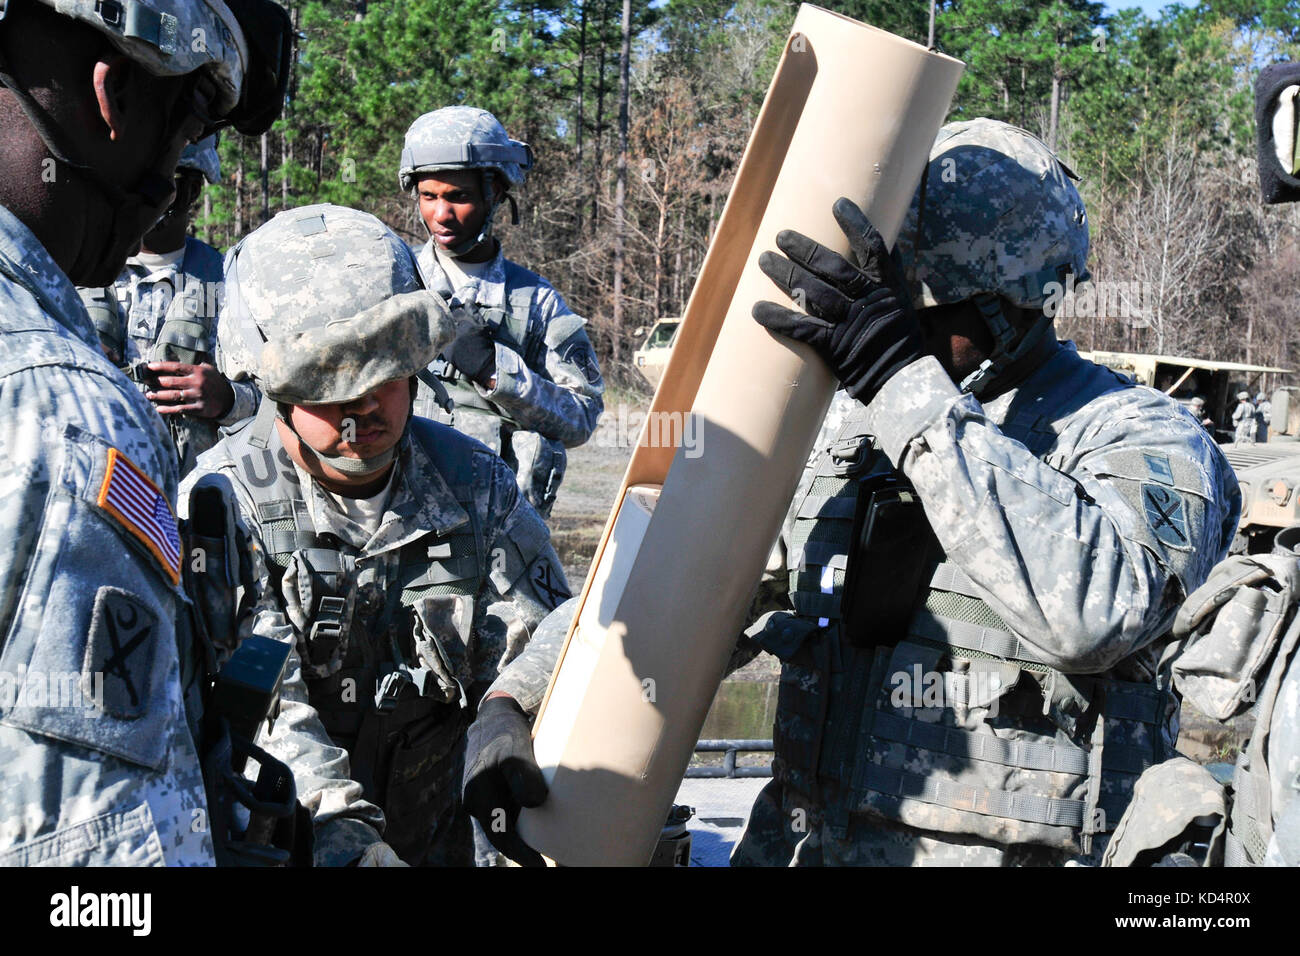 Sgt. 1st Class Christopher Jiles, platoon sergeant,  Sgt. Fabian Gutierrez, ammuntition sergeant, and Spc. Jovon Cauthen, #1 cannonier,  with the 178th Field Artillery Battalion, A Battery, South Carolina Army National Guard, inspect ammunitions powder before distribution during their annual training on the firing ranges at Fort Stewart, GA. The 178th focus for training is on manual gunnery, a skill seldom used with today’s technology, but very important for when computers go down and technology doesn't work. (U.S. Army National Guard photo by OC Tracci Dorgan/Released) Stock Photo